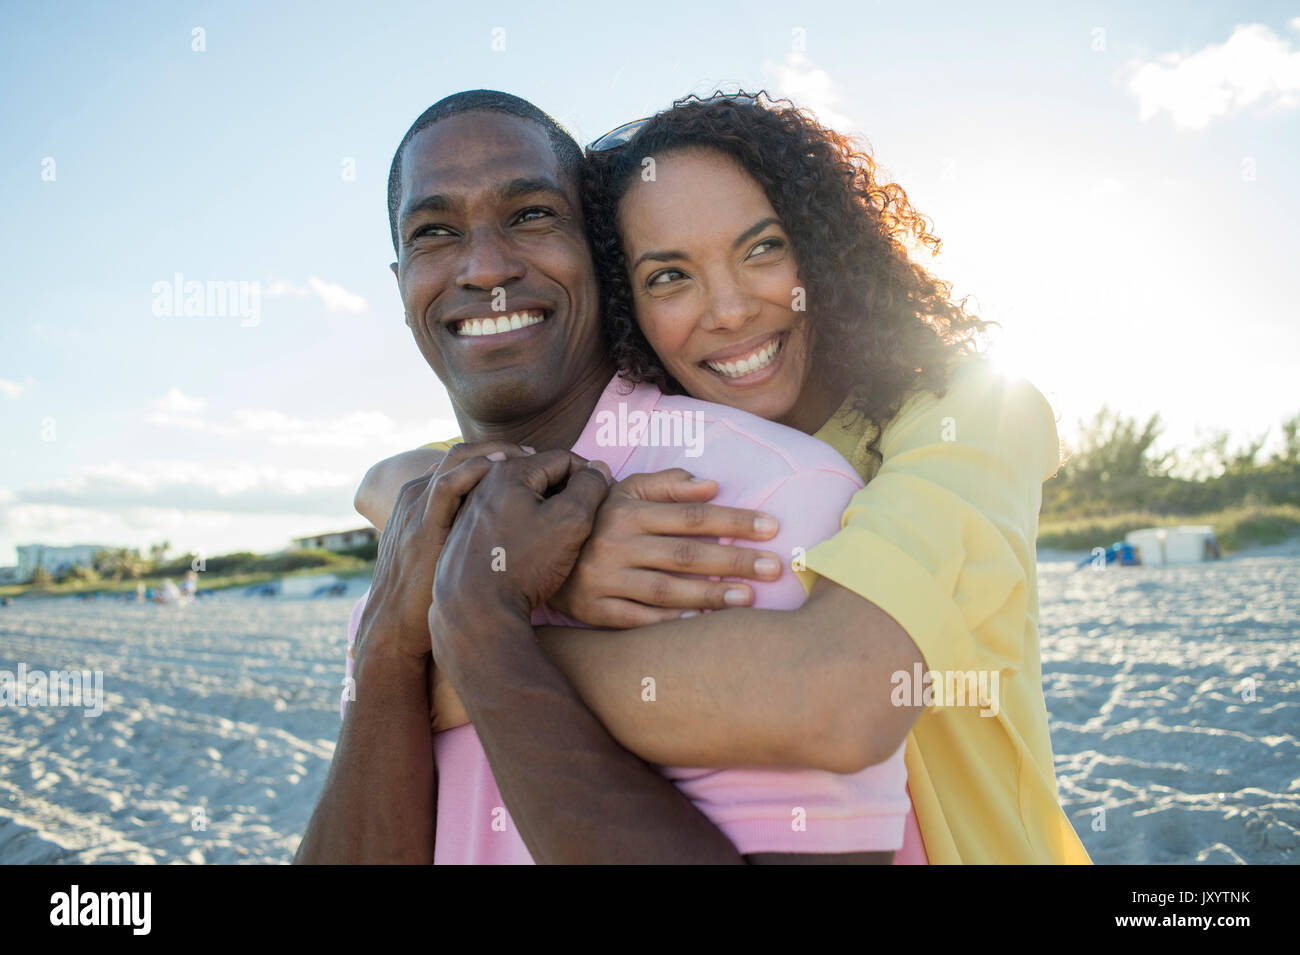 Portrait of smiling couple hugging on beach Stock Photo